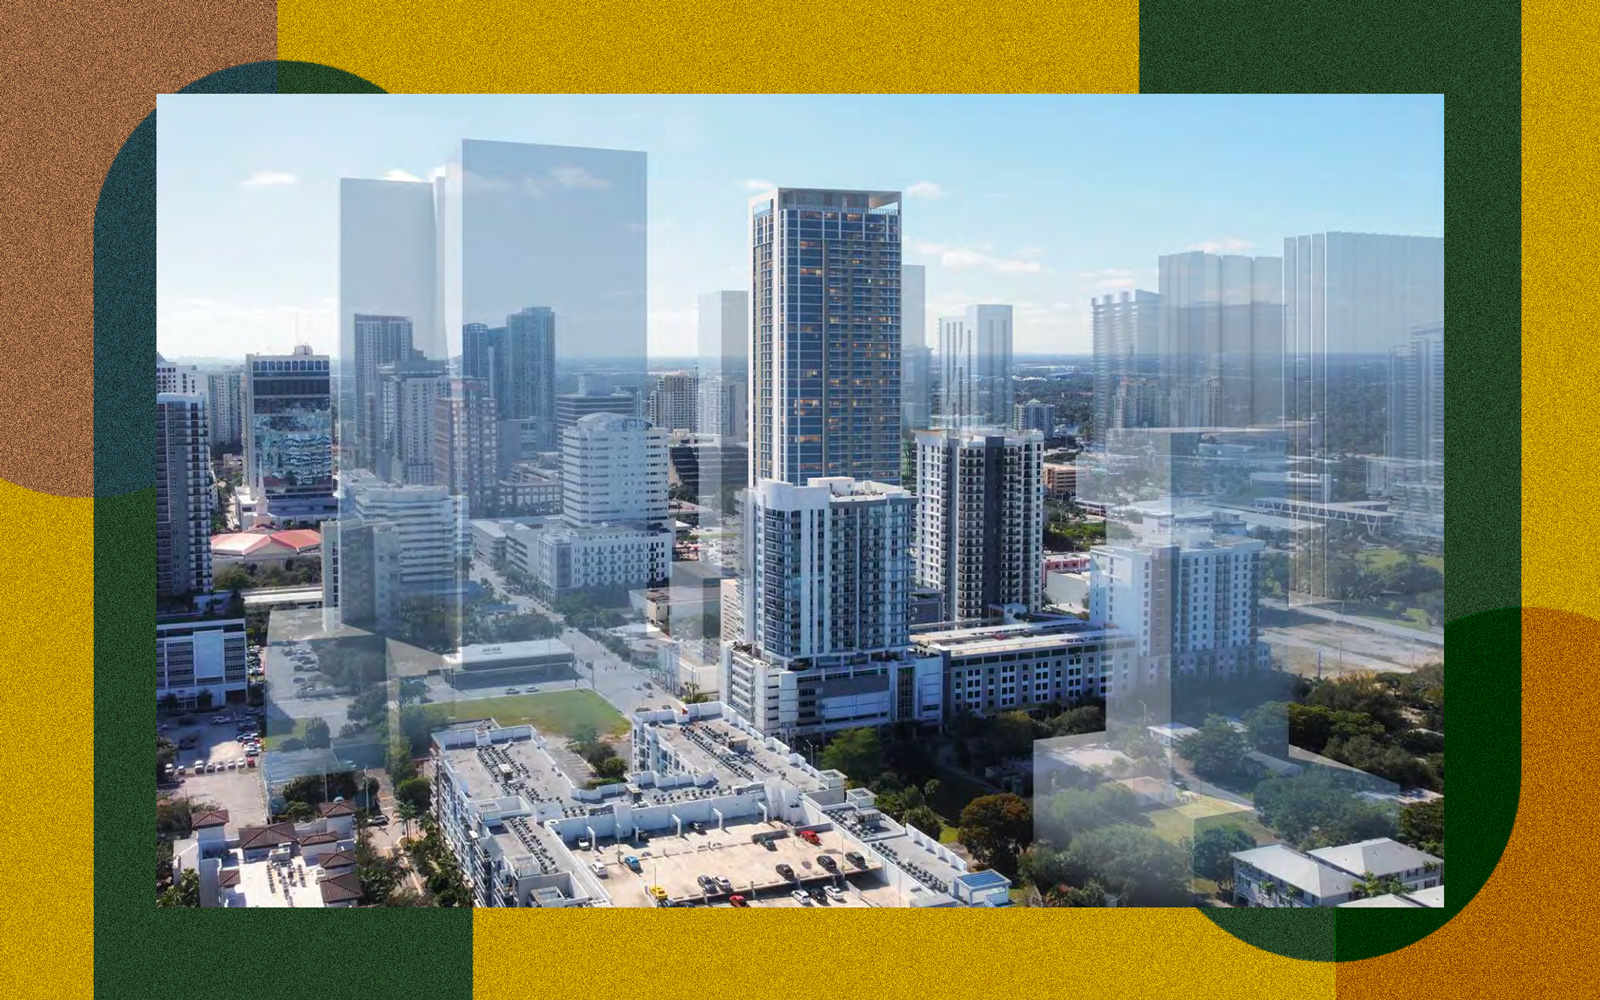 Successor to NRIA Plans 48-Story Fort Lauderdale High-Rise